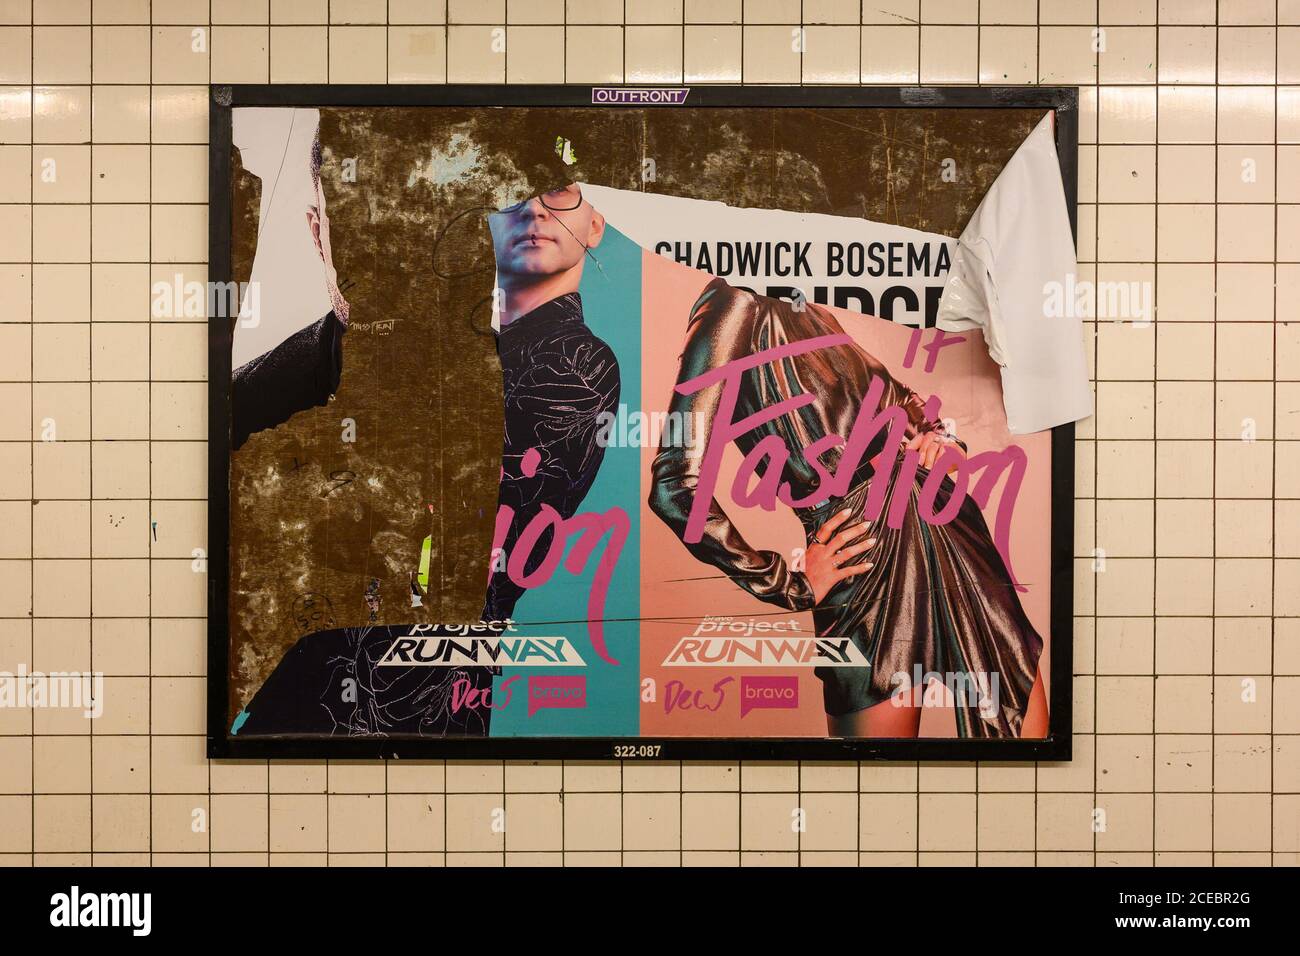 A advertisement for Project Runway ripped in a way to show the name of Chadwick Boseman from a previous ad. Unclear whether it was torn this way intentionally to reveal his name. Stock Photo